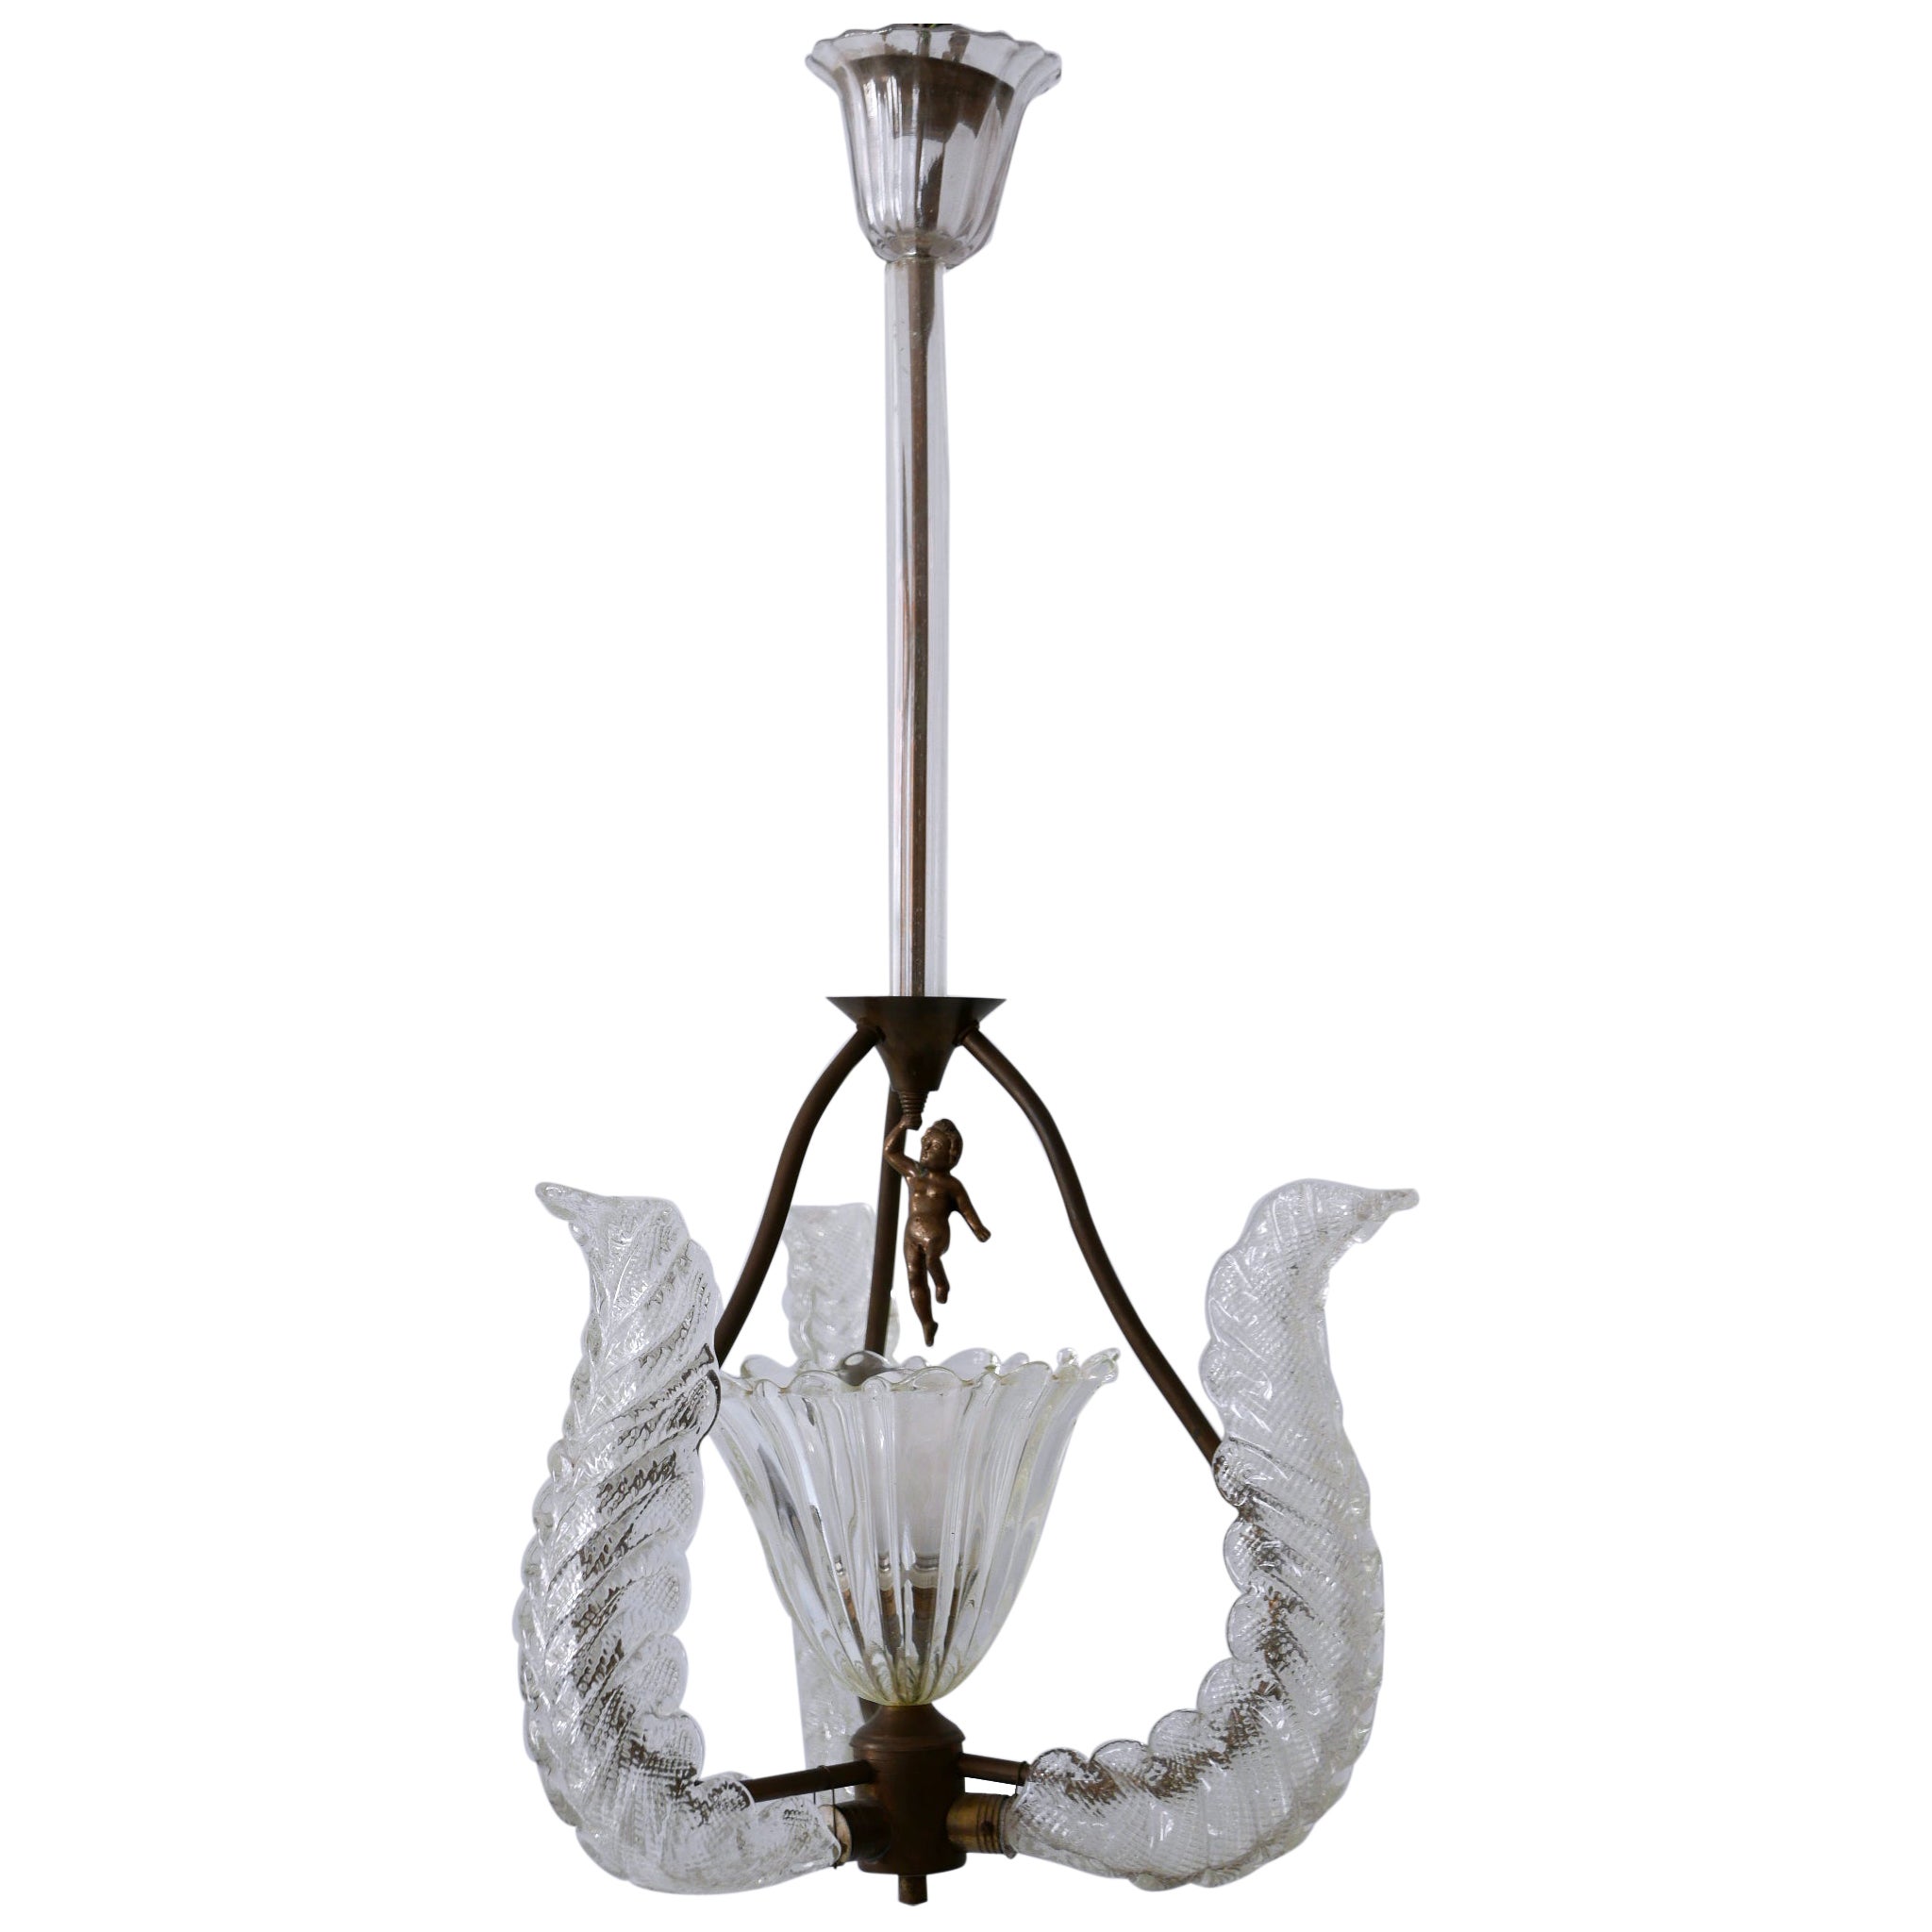 Rare Mid Century Modern Chandelier or Pendant Lamp 'Putti' by Barovier & Toso For Sale